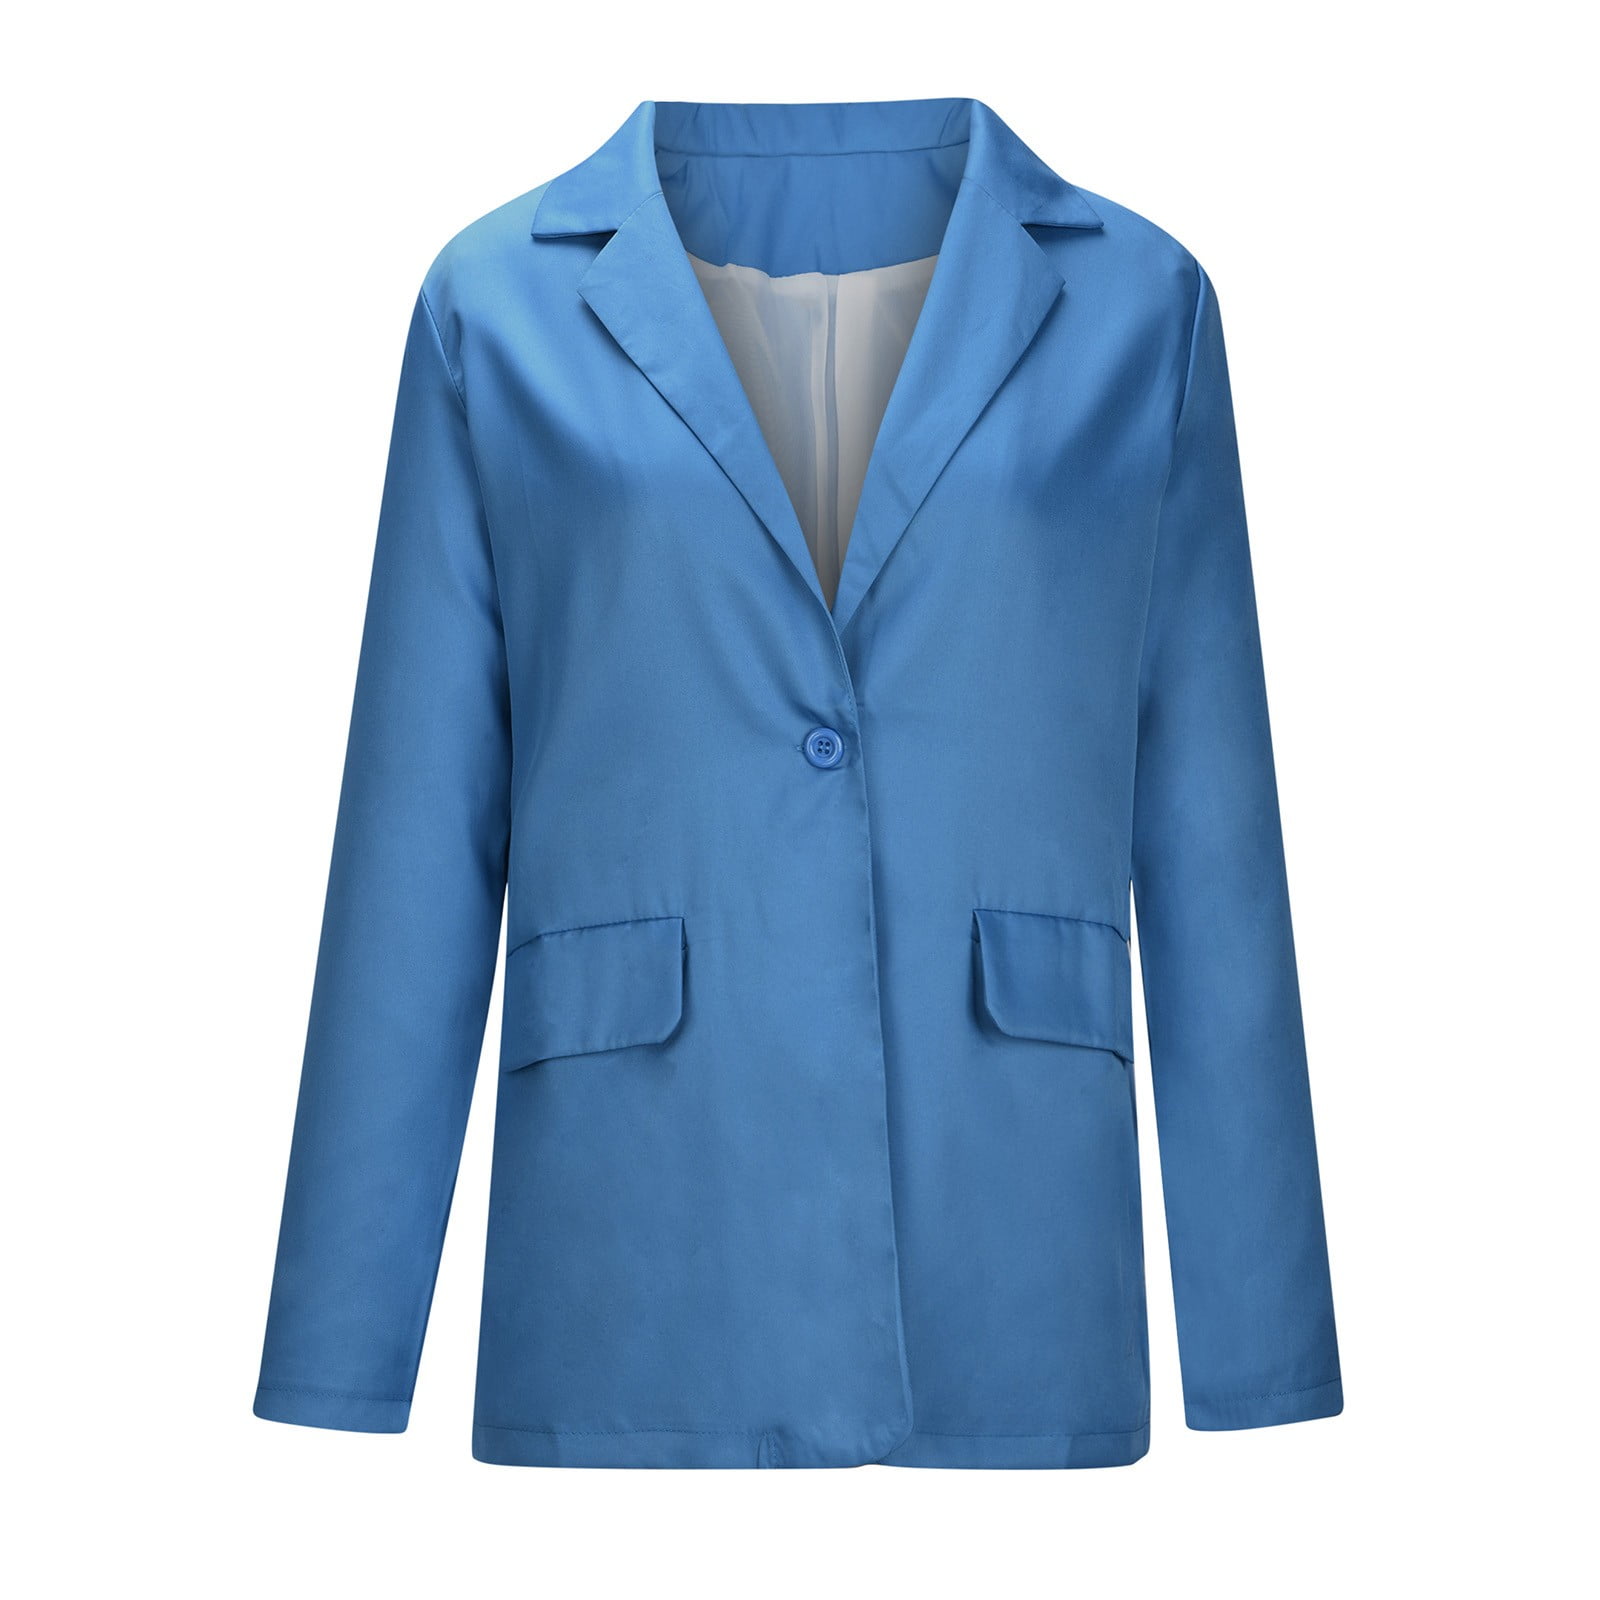 Clearance Under $10 ! BVnarty Women's Jacket Coat Plus Size Suit Collar  Open Front Business Cardigan Winter Fashion Top Shacket Jacket Casual  Lightweight Long Sleeve Solid Color Blue XXL 